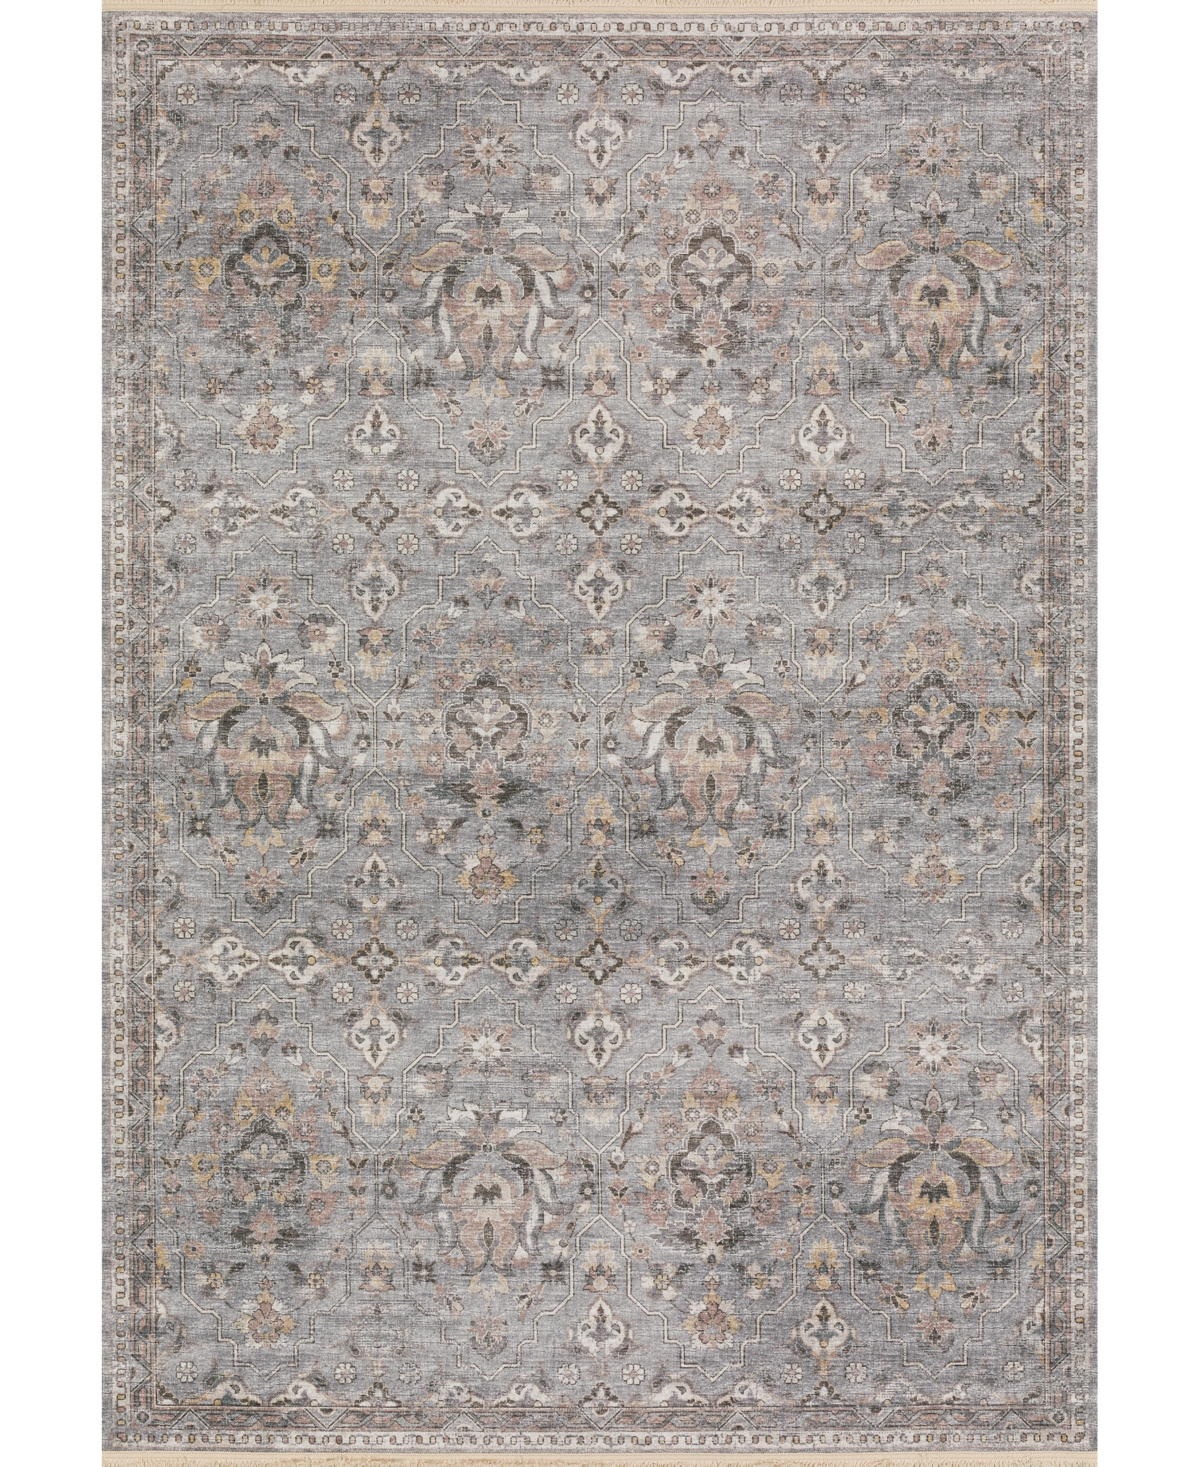 D Style Ionic IOC4 5' x 7'6in Area Rug - Silver Tone